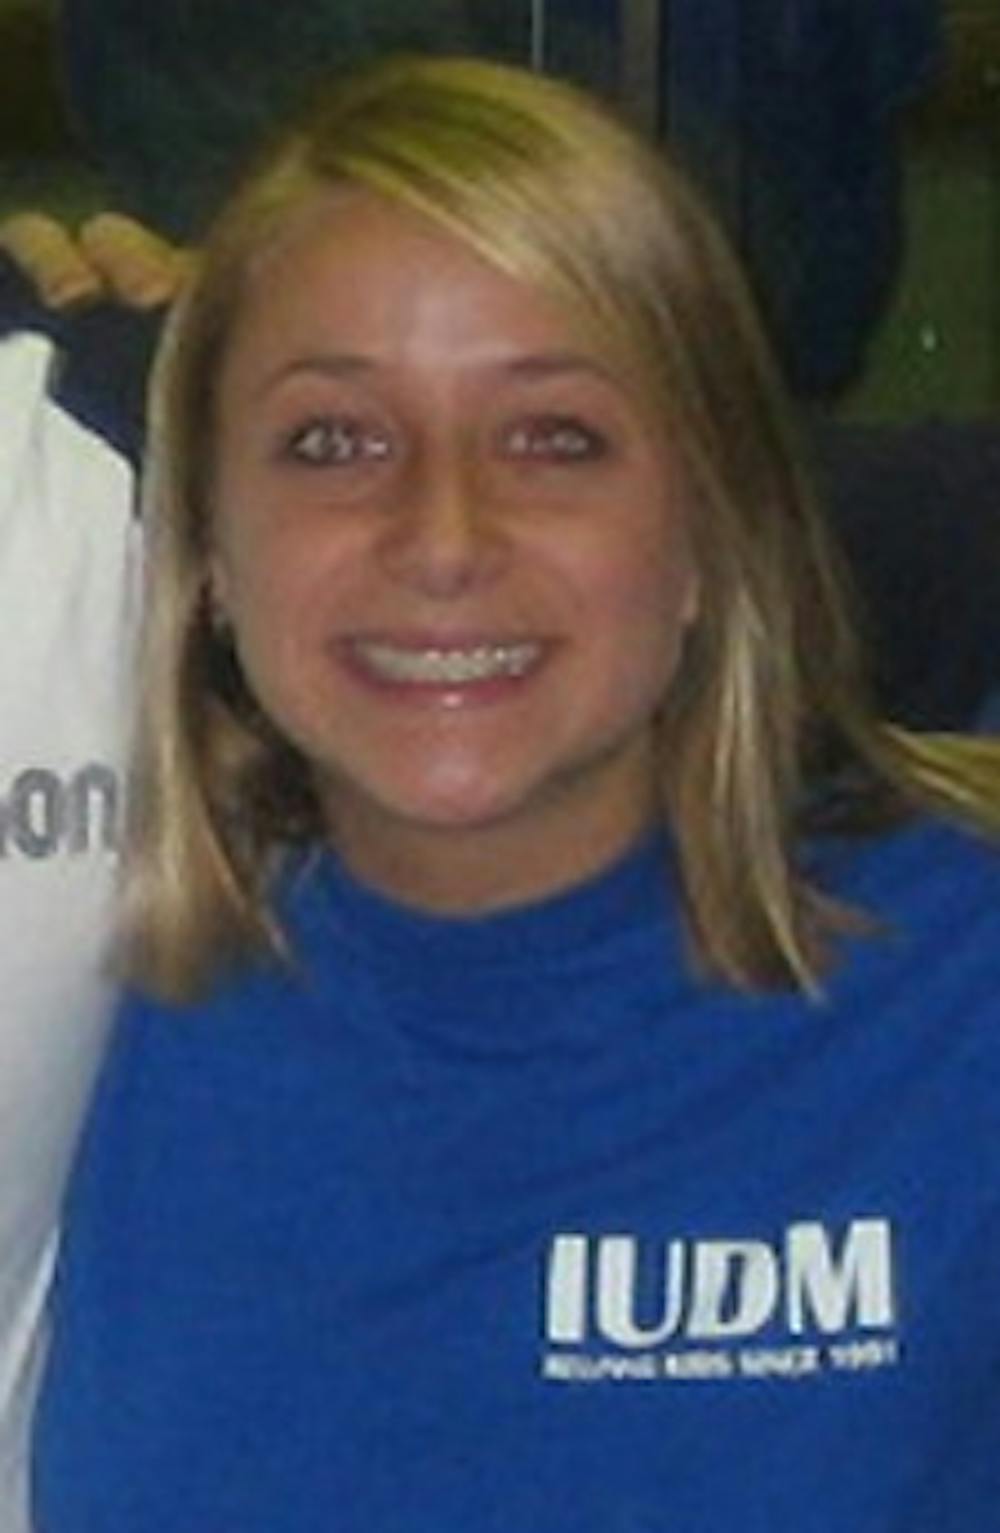 Ashley Crouse
IU student who died in 2005